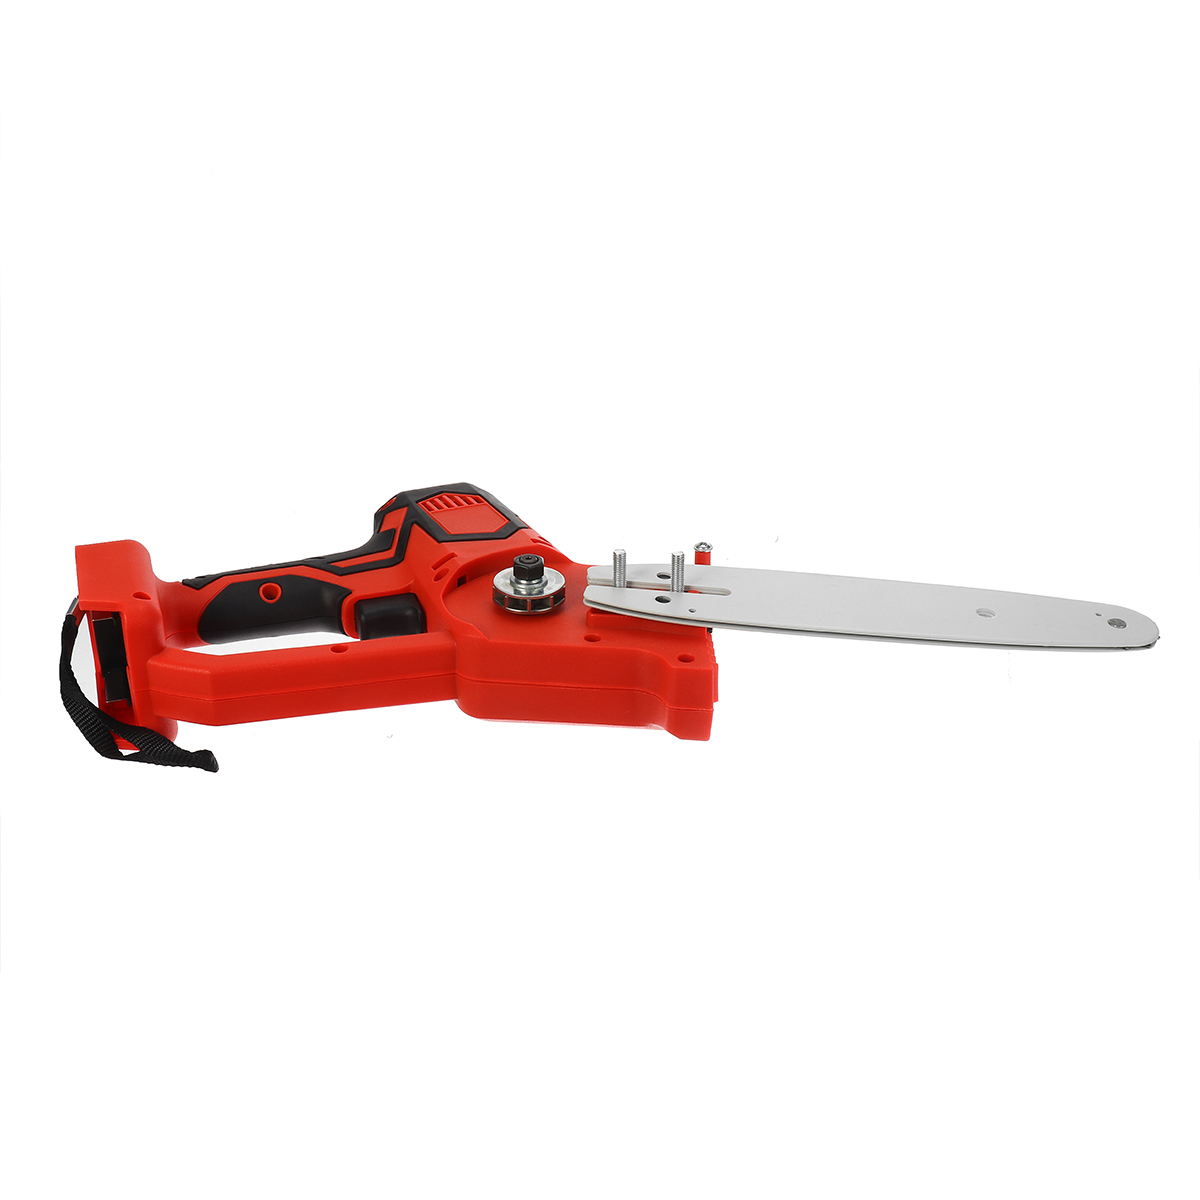 Portable-One-Hand-Saw-Woodworking-Electric-Chain-Saw-Wood-Cutter-For-Makita-21V-Battery-1755317